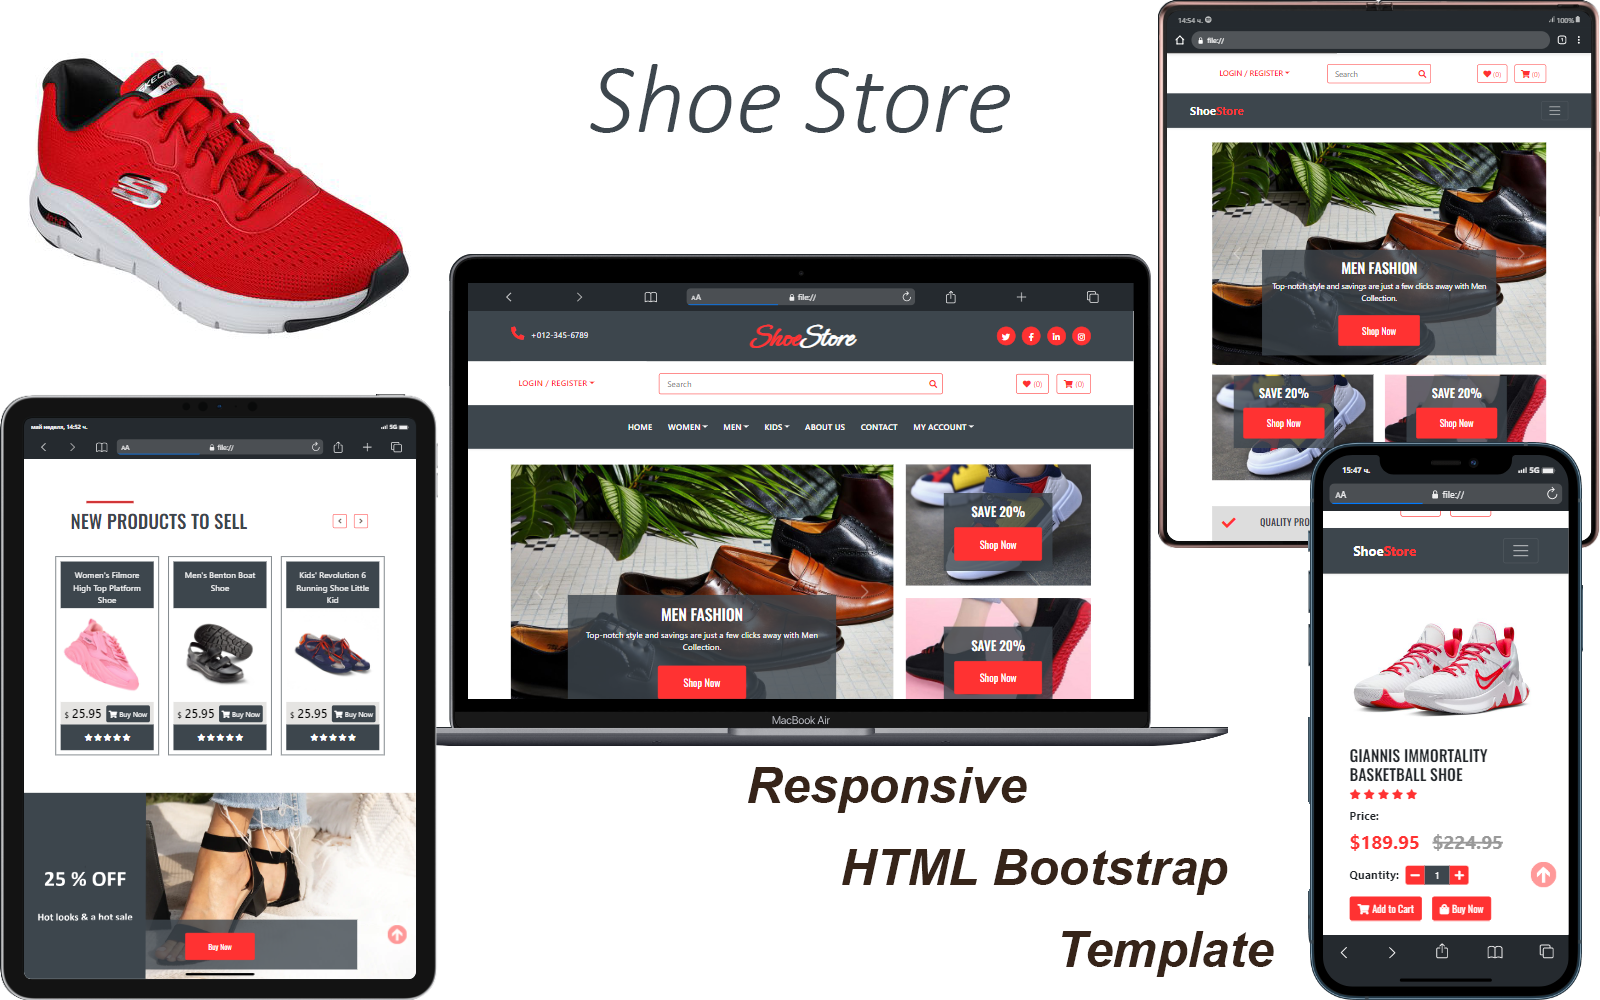 Shoe Store - Responsive HTML Bootstrap Template